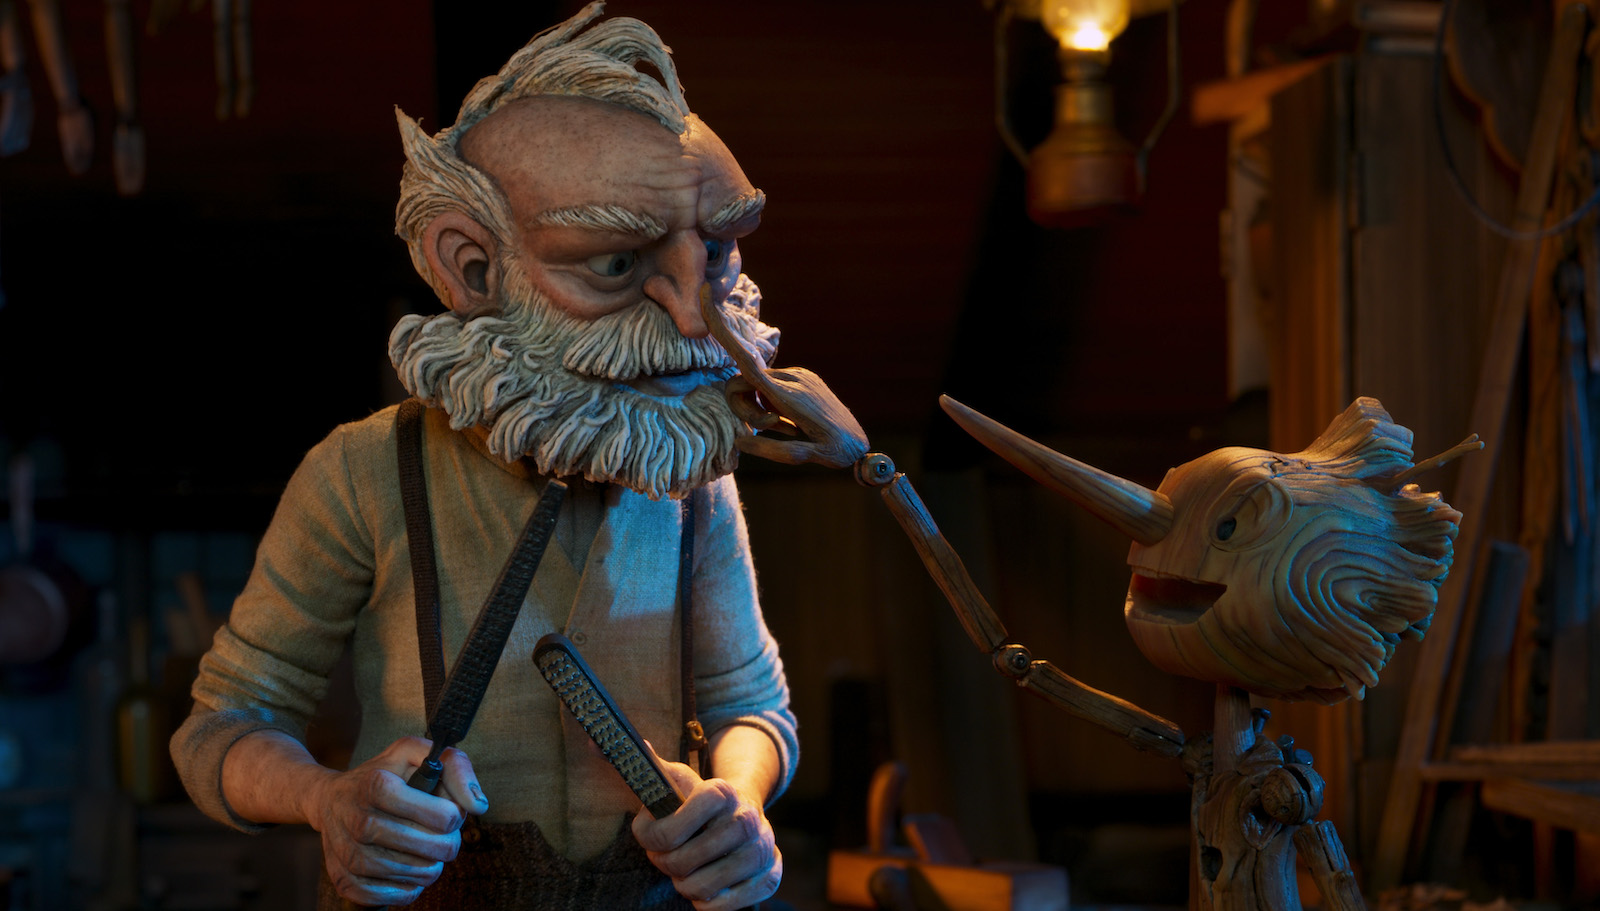 The smiling puppet Pinocchio touches the nose of his father Gepetto